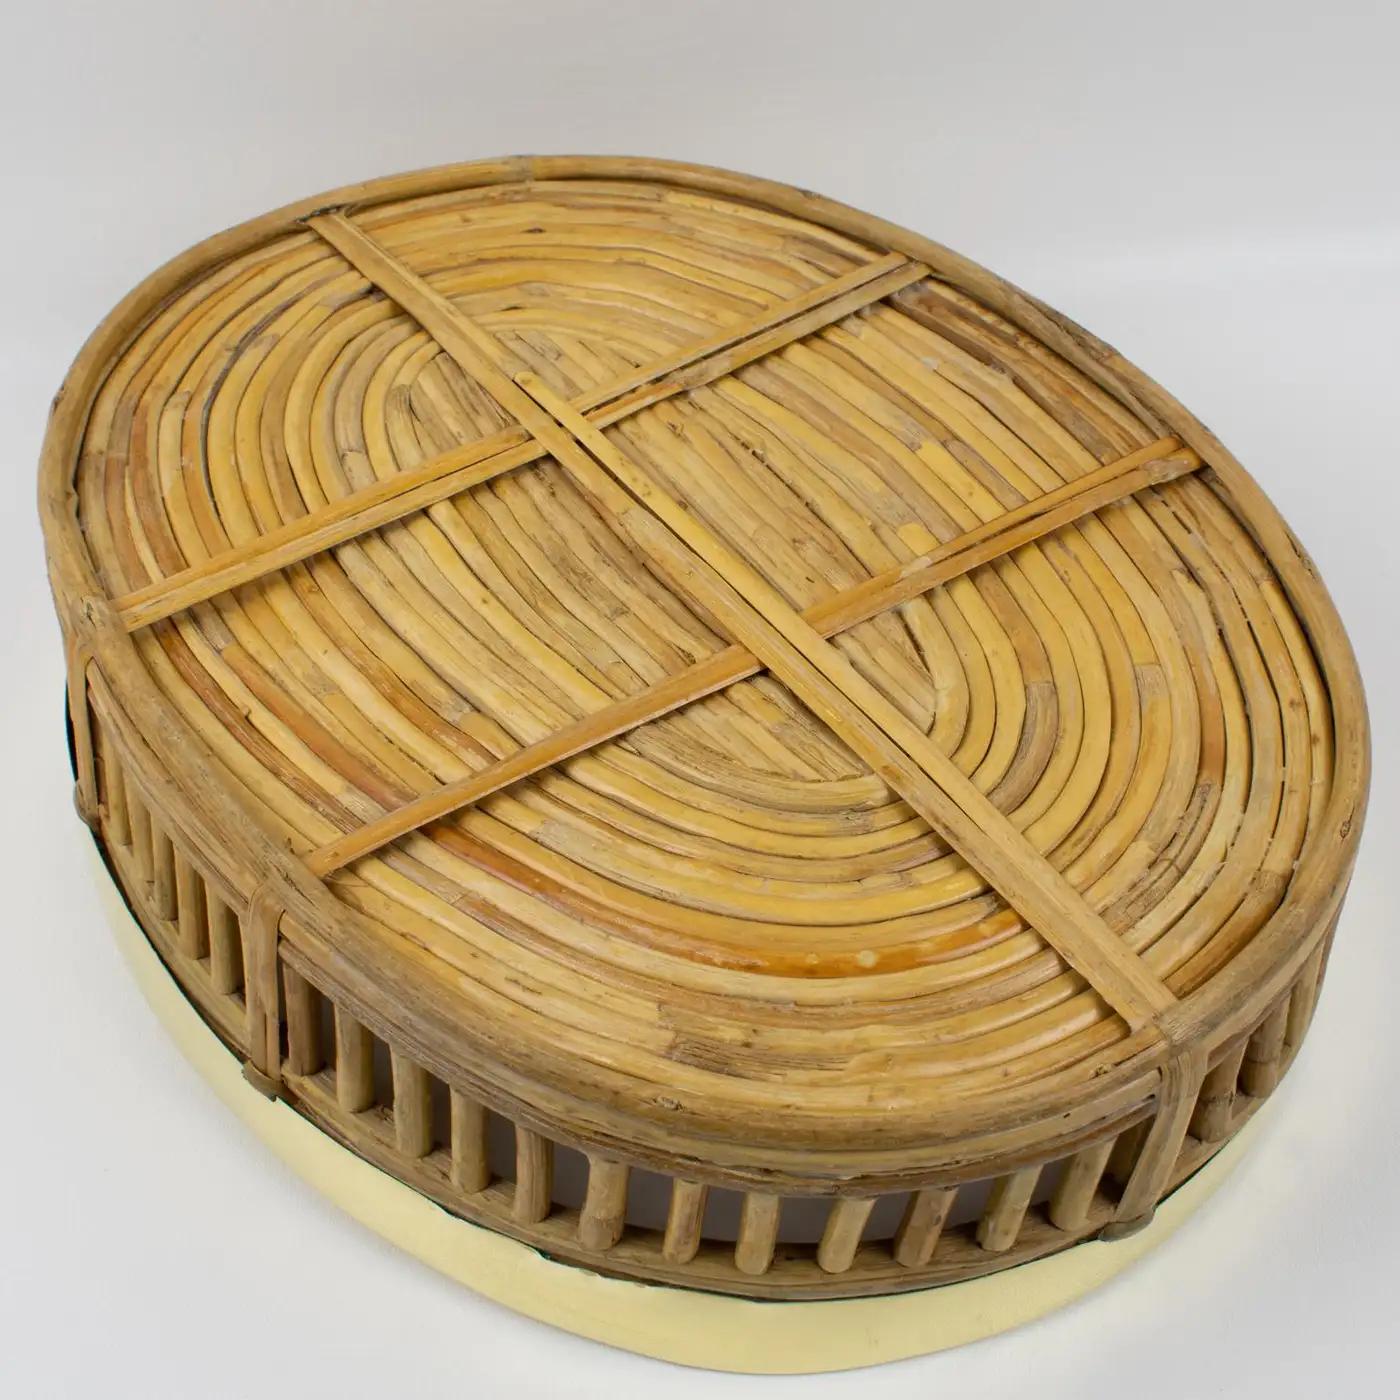 Rattan Bamboo Wicker and Brass Bowl Basket Centerpiece, Italy 1960s For Sale 1